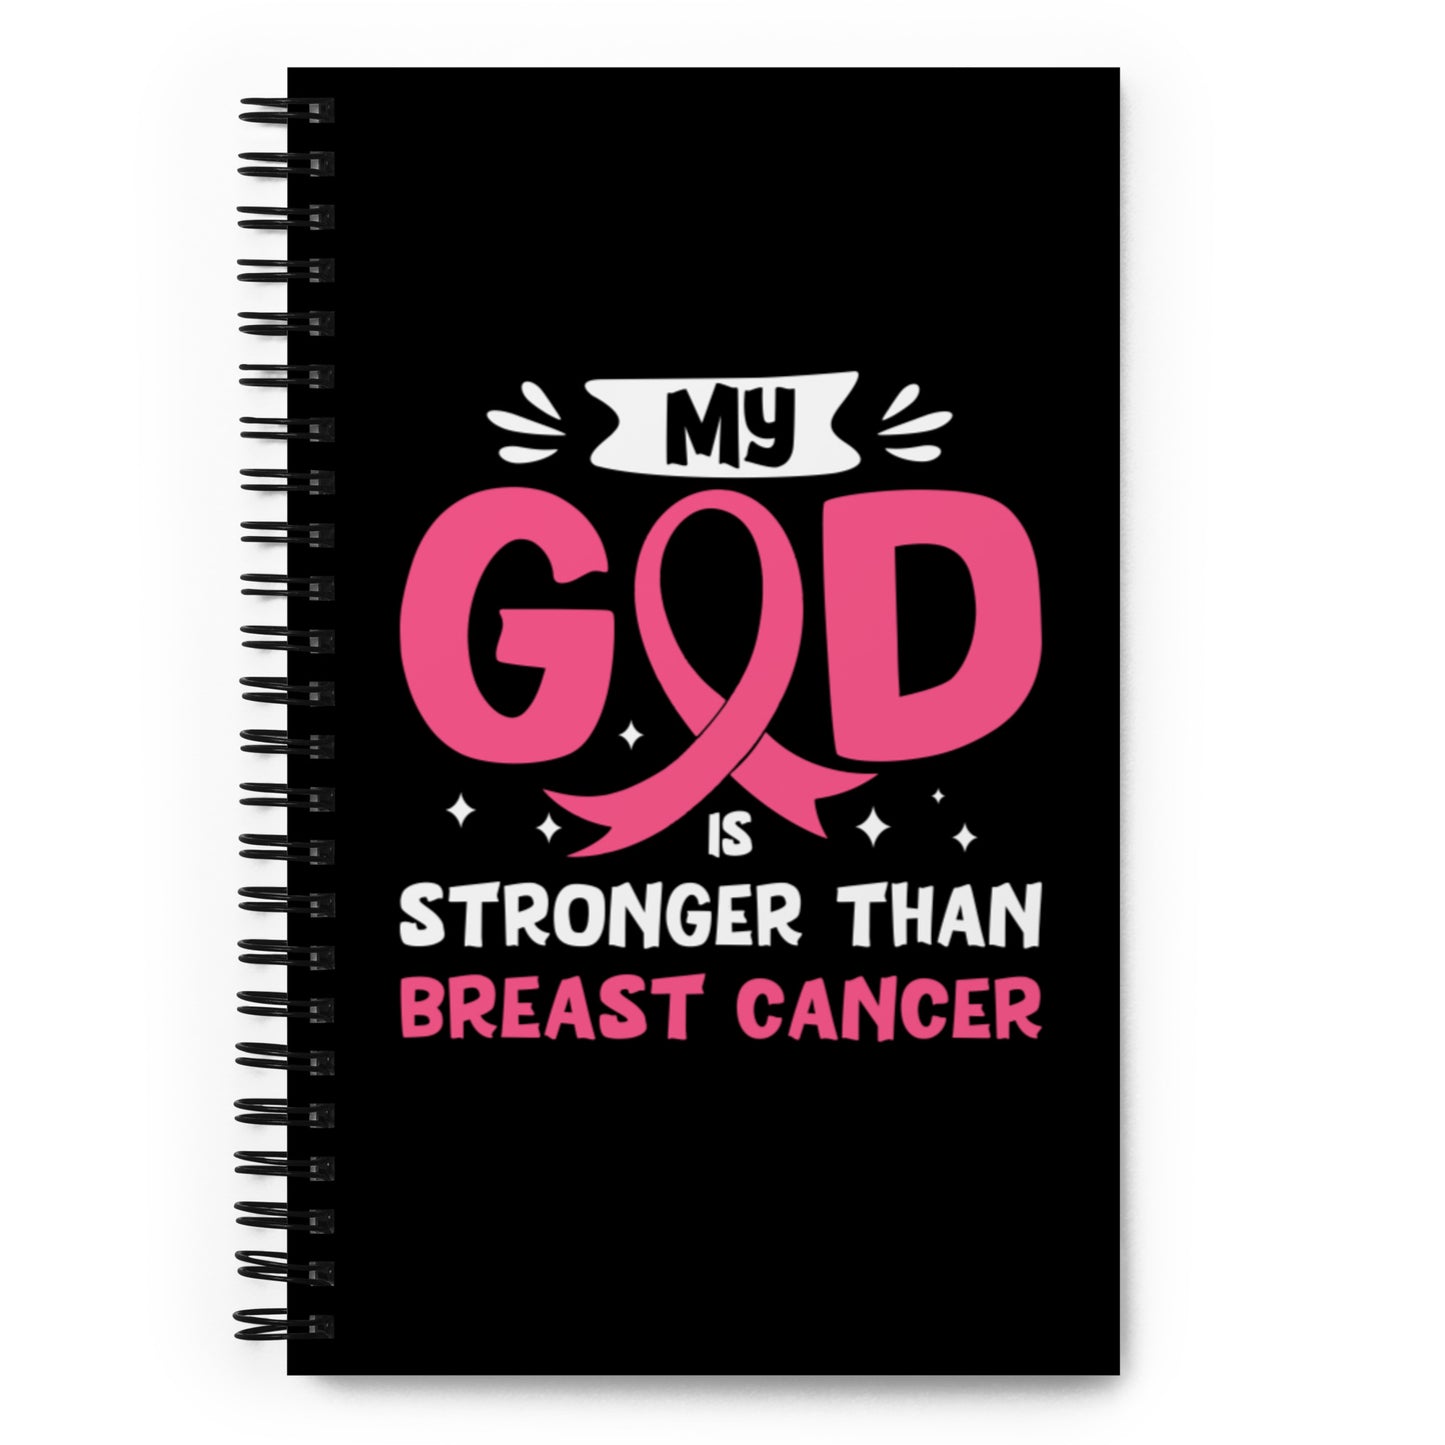 My God is Stronger Than Breast Cancer Spiral notebook